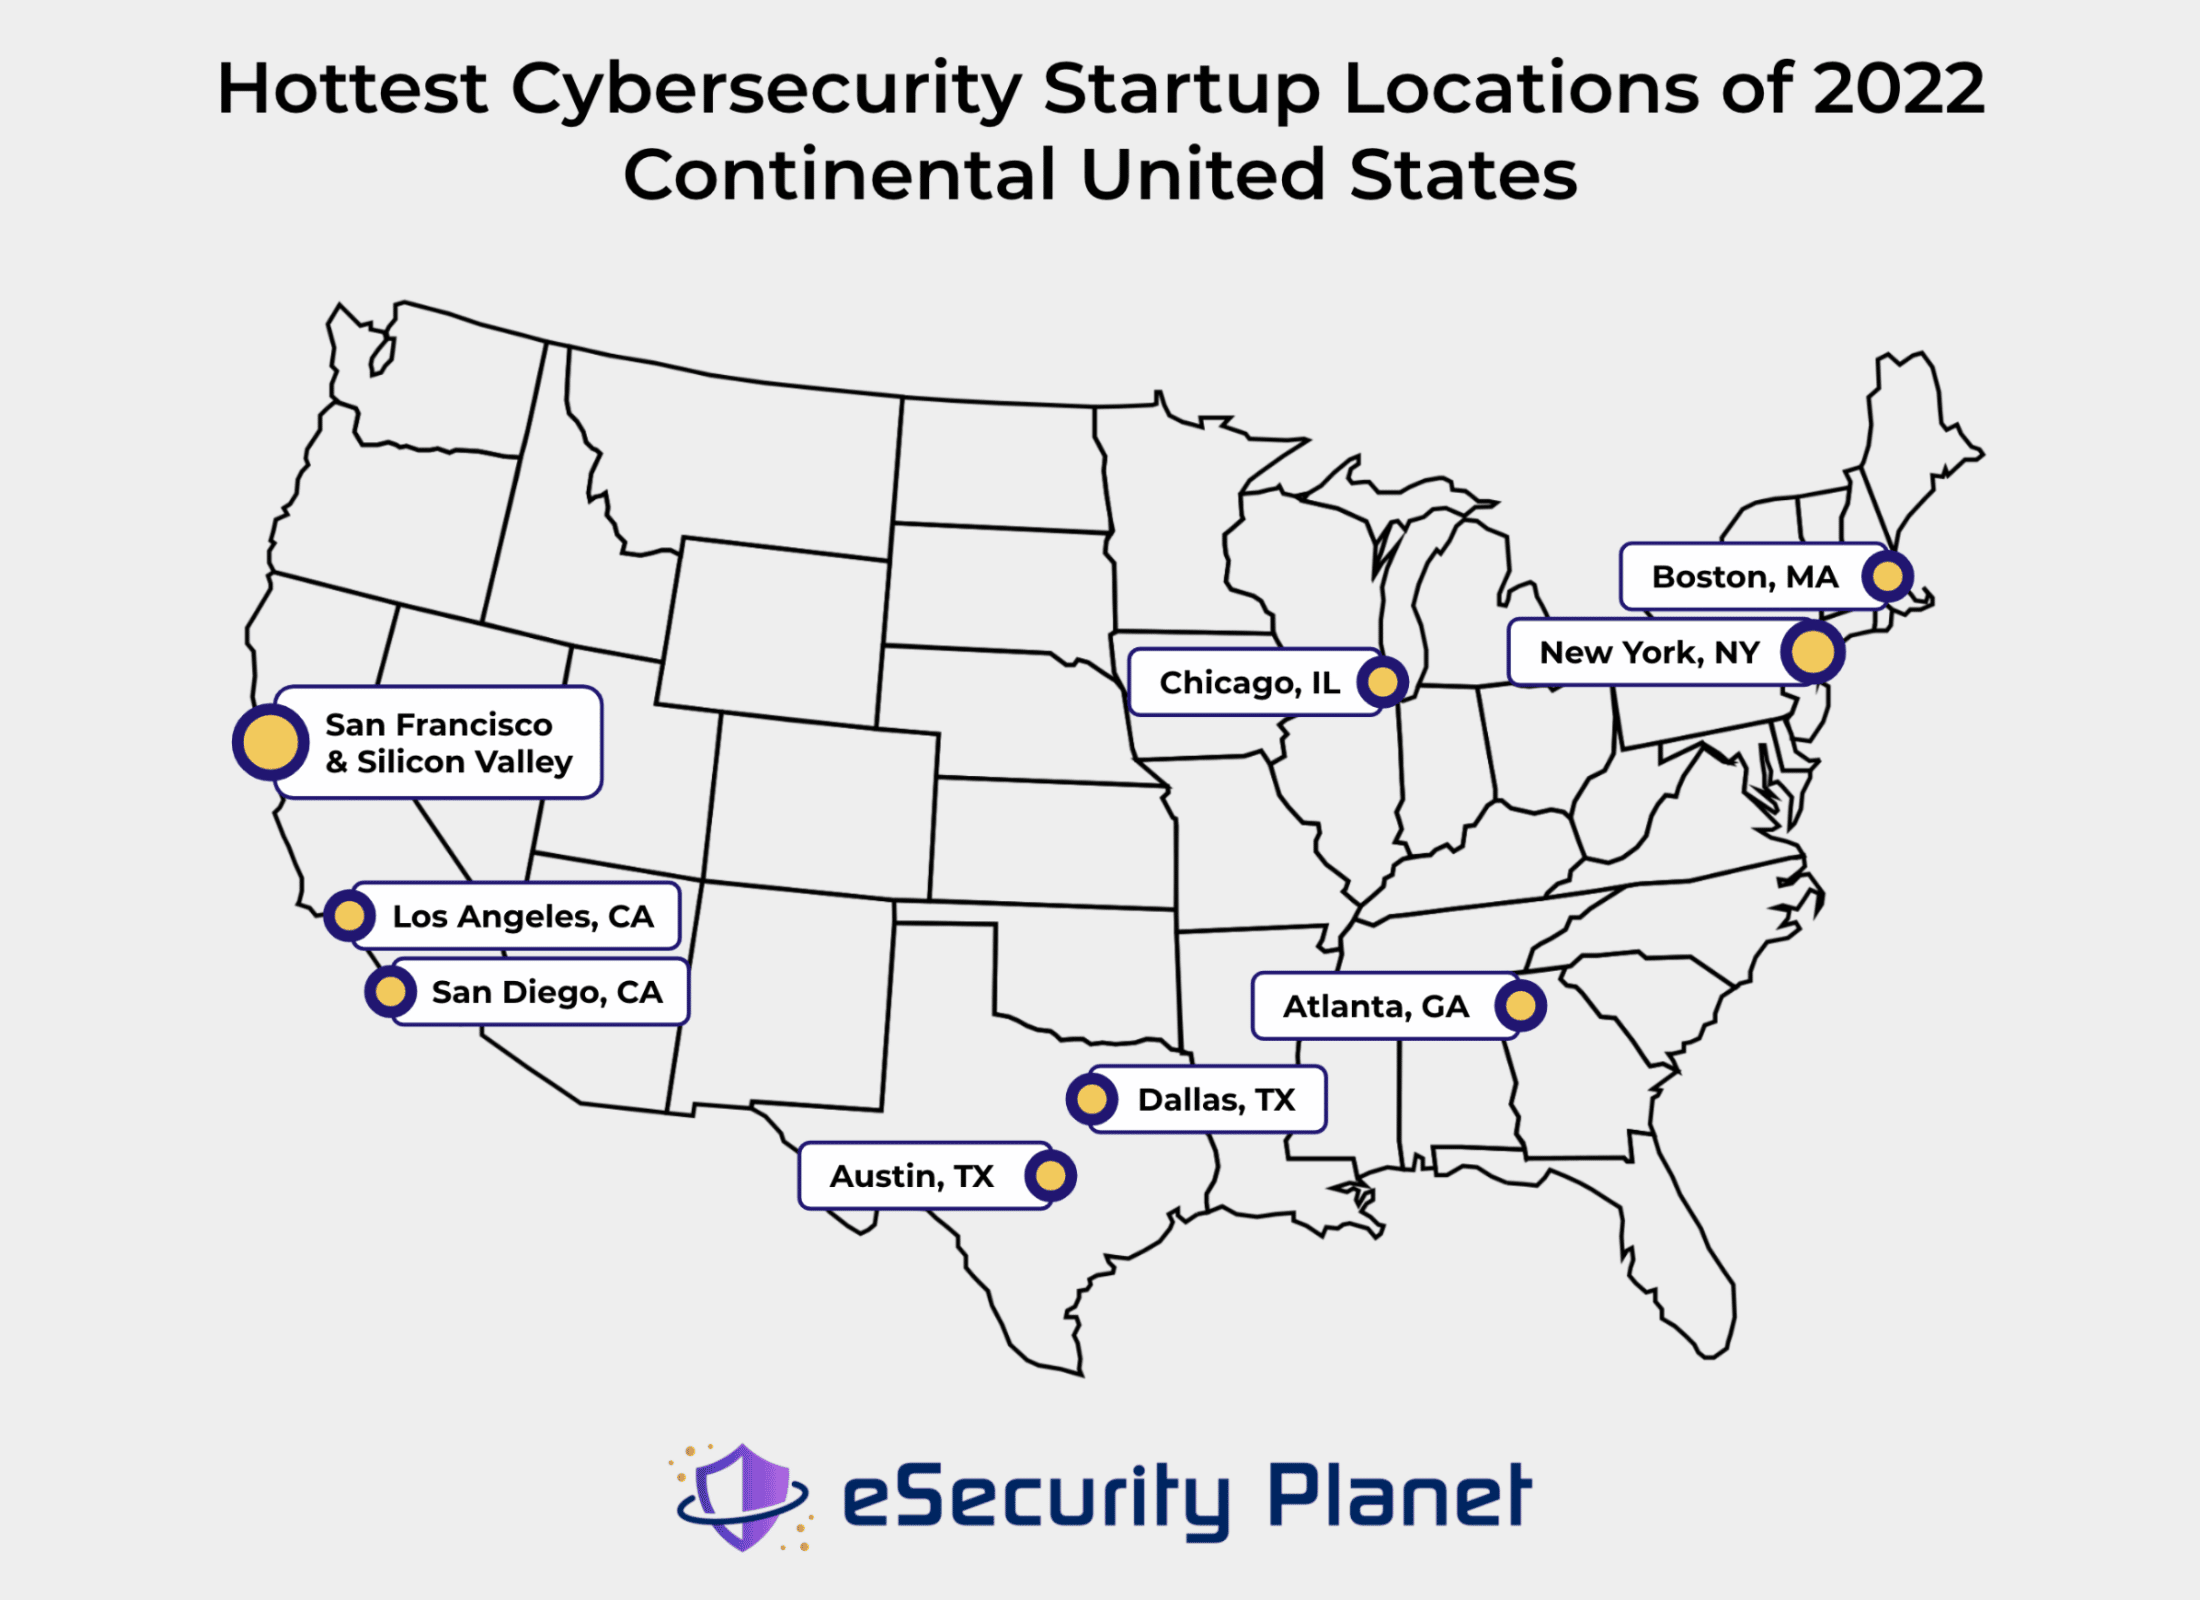 A graphic image showing the top cybersecurity startup locations of 2022. Designed by Sam Ingalls.